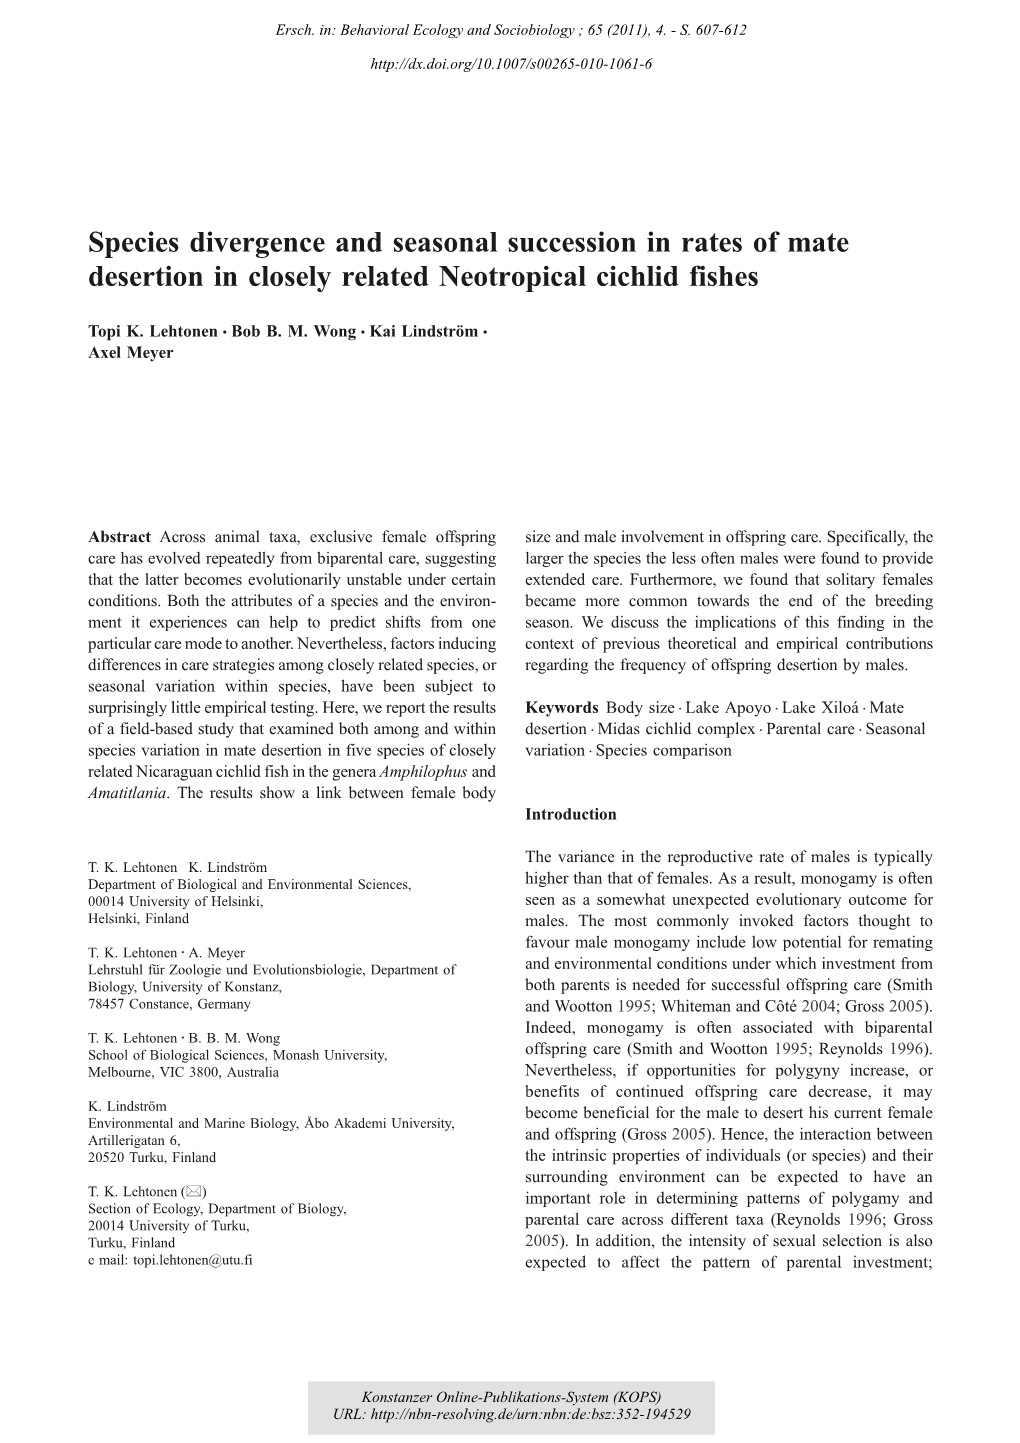 Species Divergence and Seasonal Succession in Rates of Mate Desertion in Closely Related Neotropical Cichlid Fishes